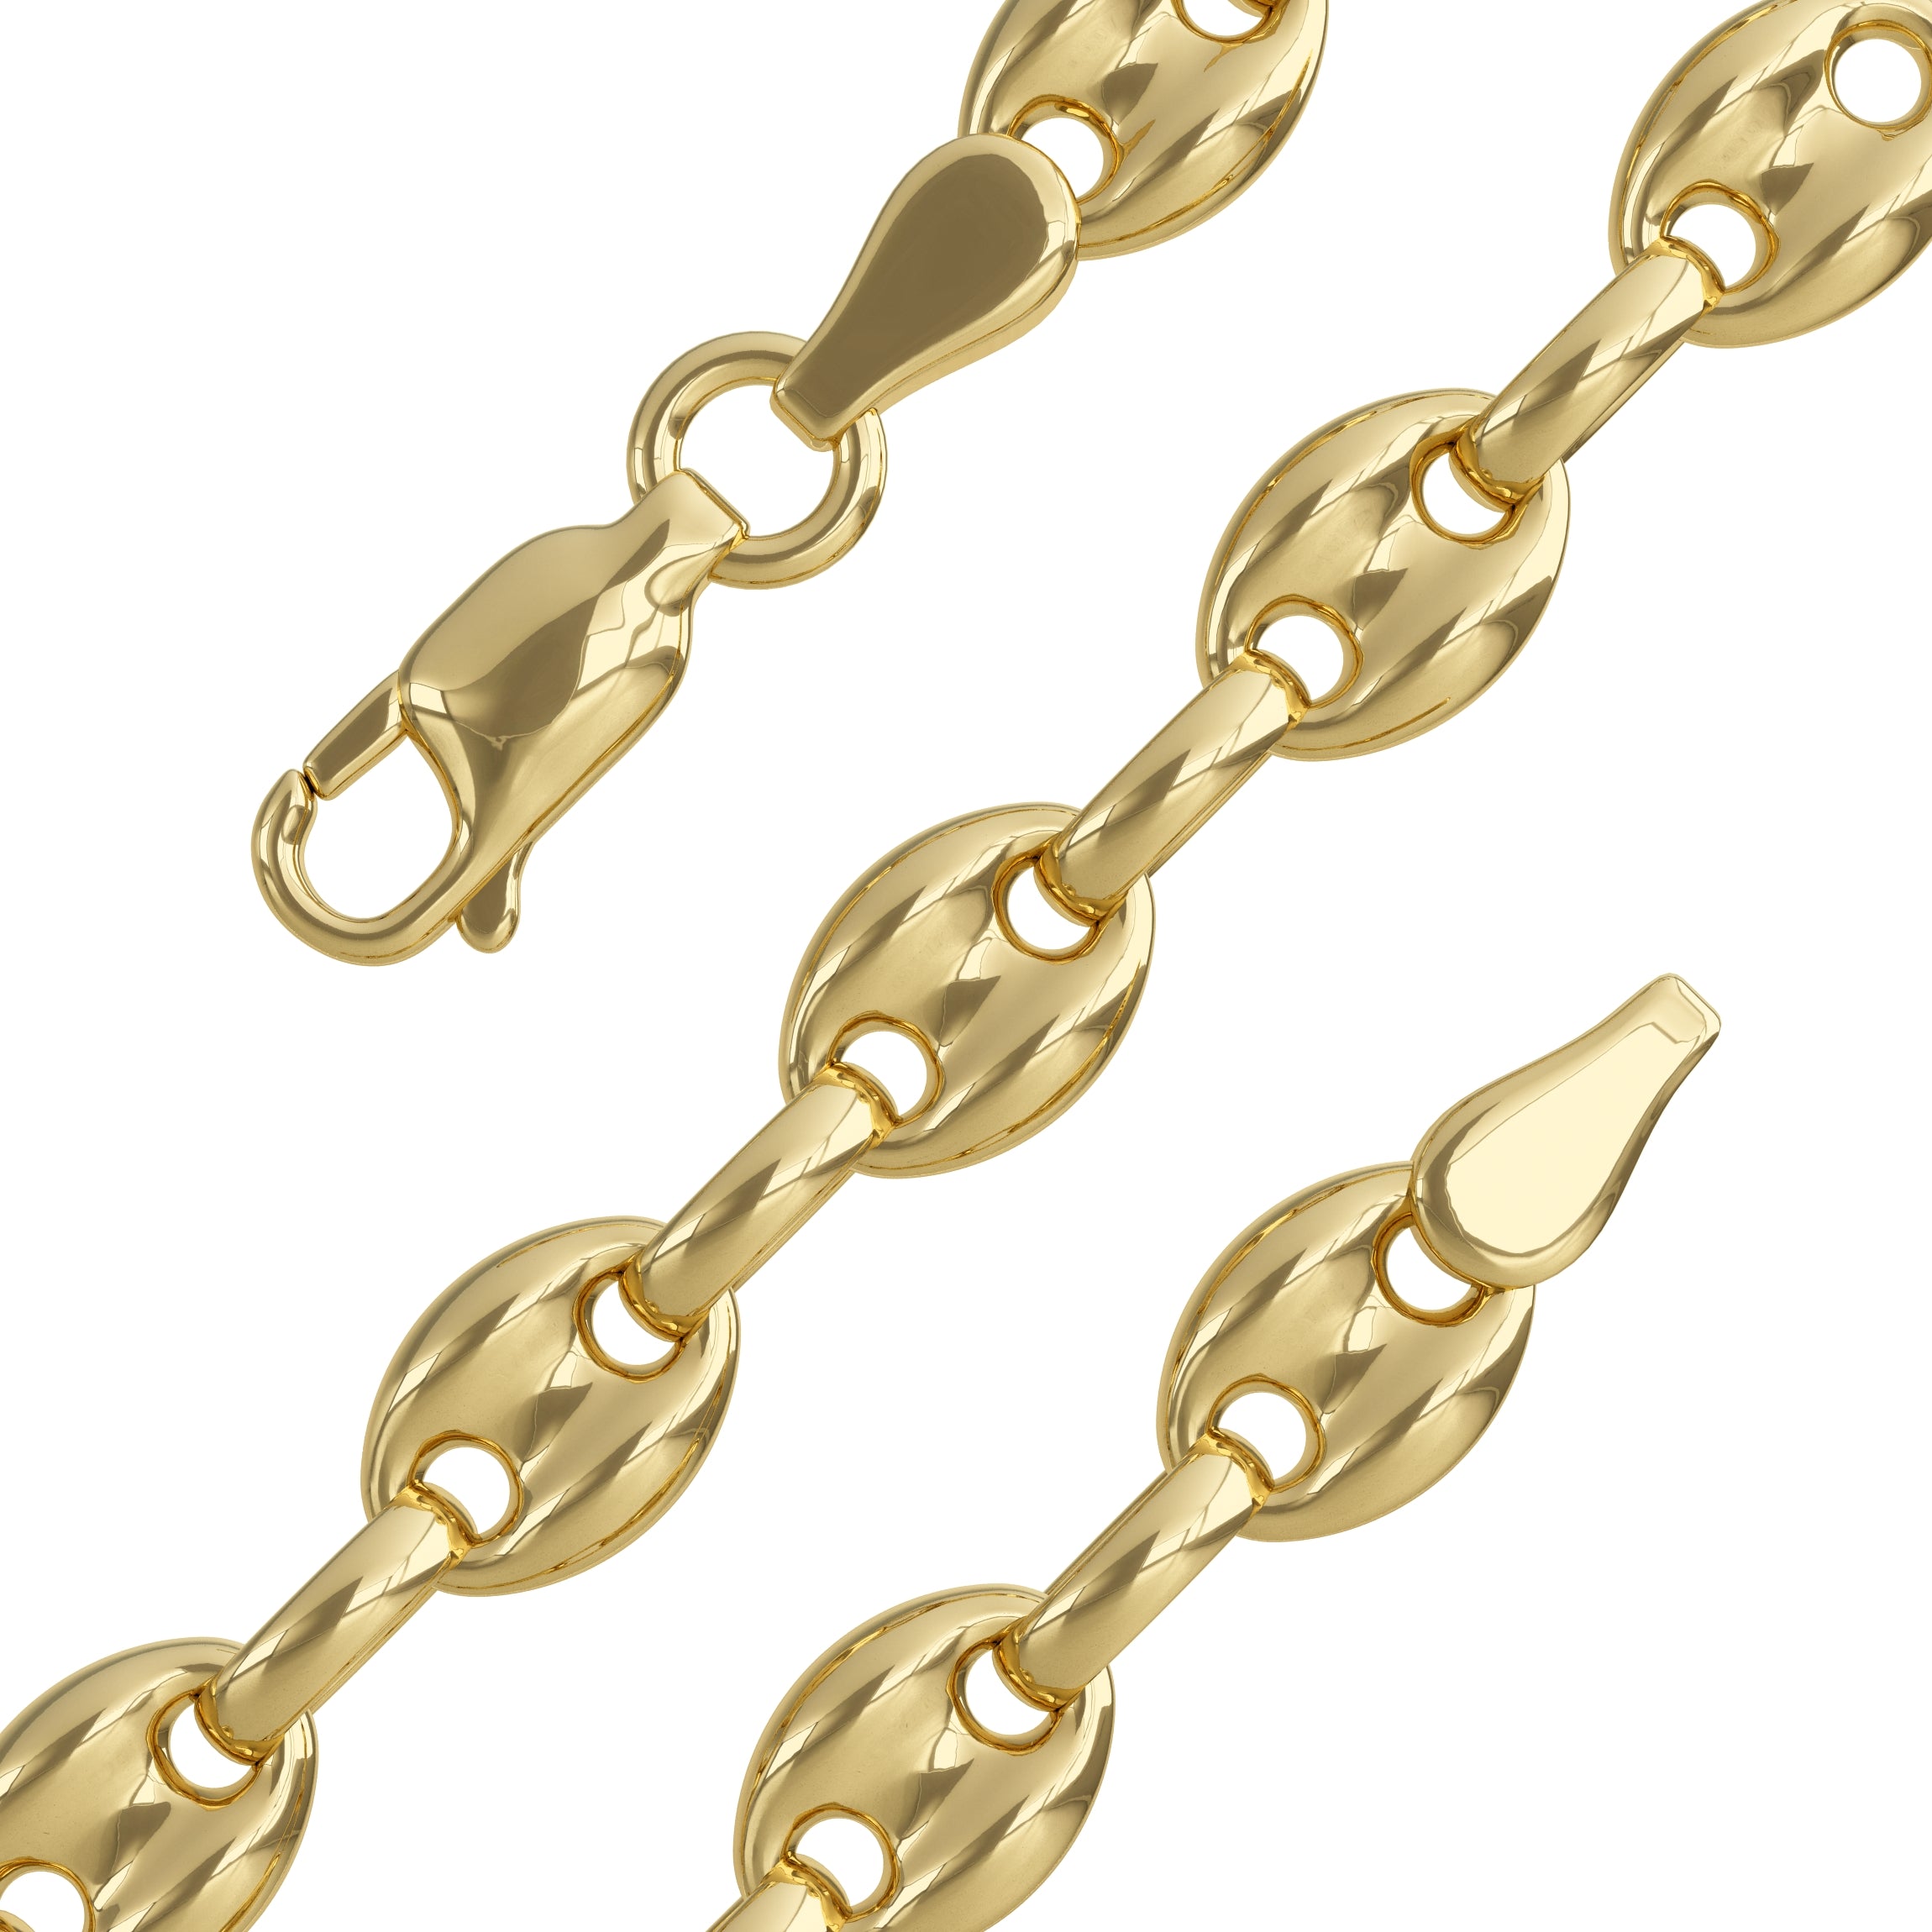 14k Yellow Gold 4mm 'Gucci Style' Anchor Link Chain 20